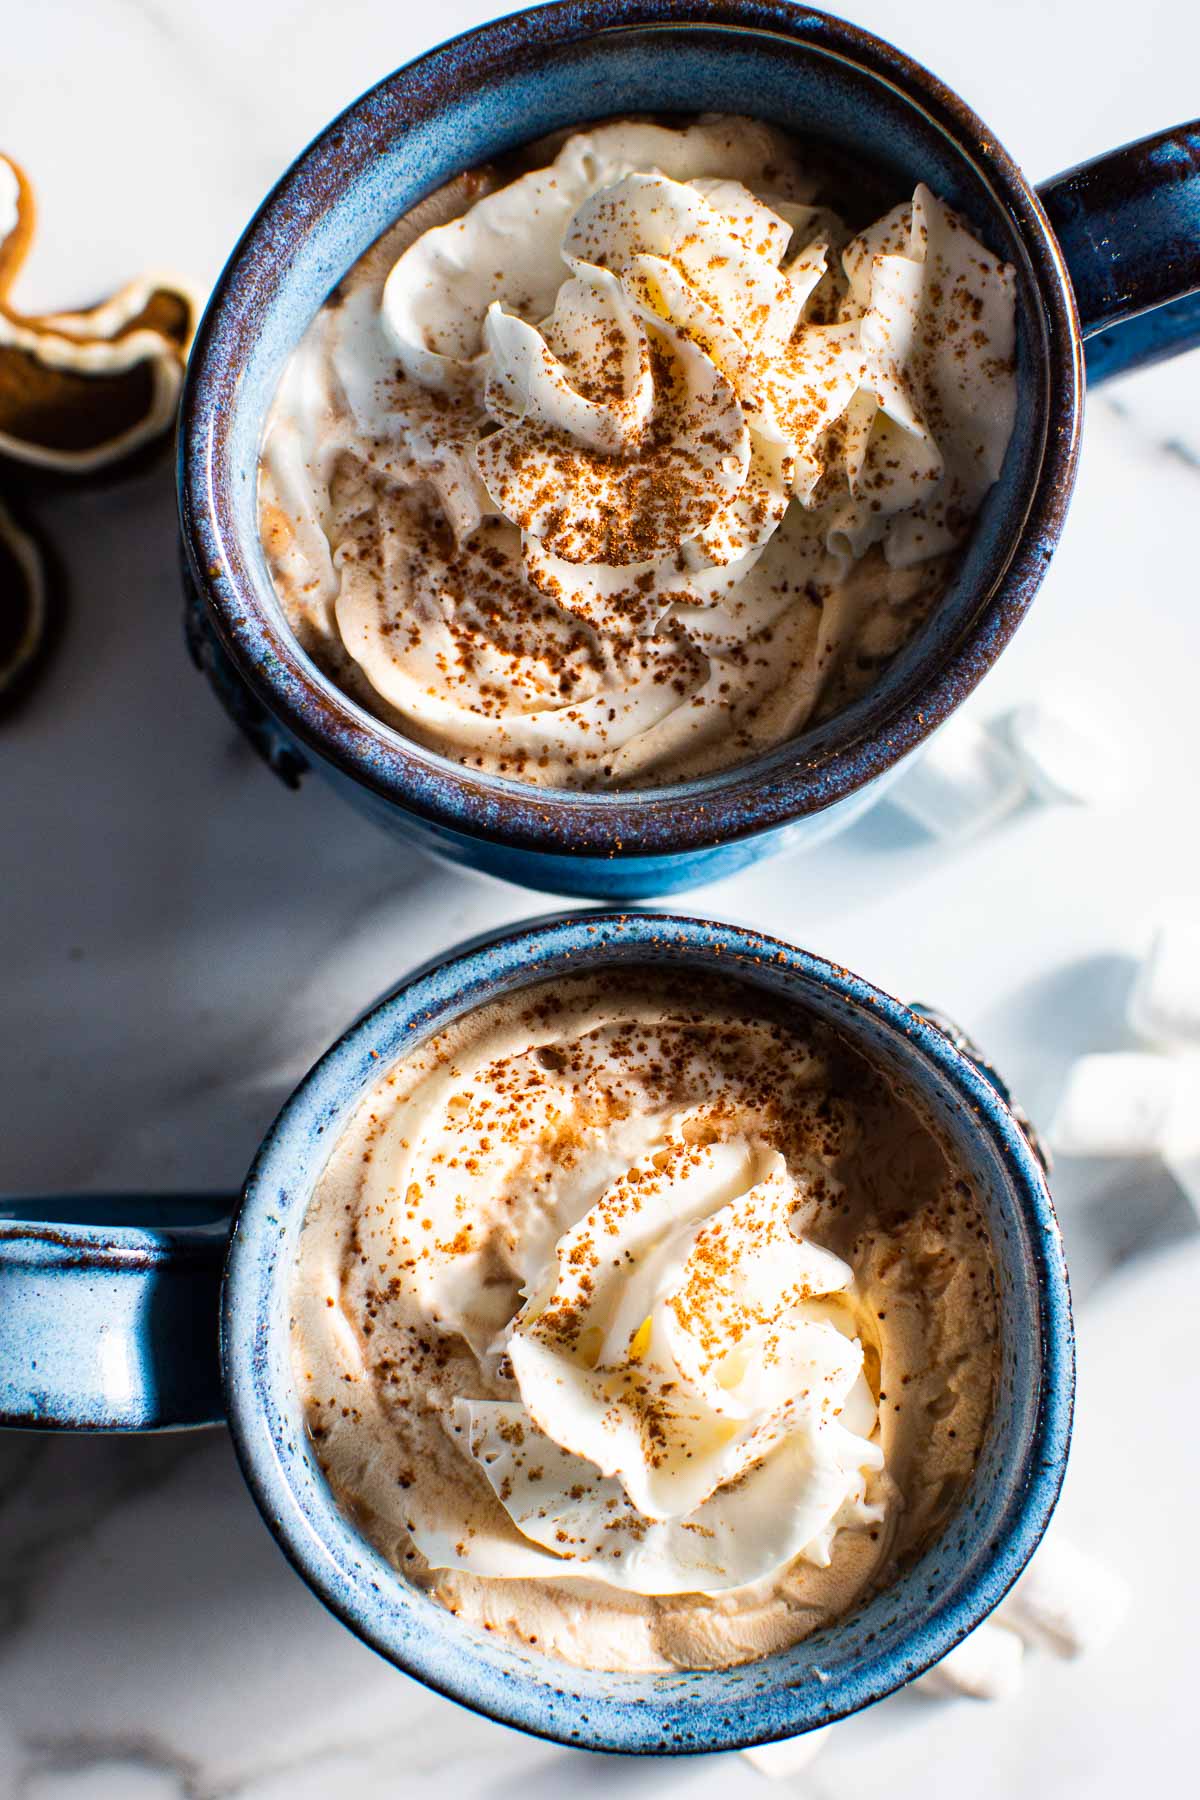 creamy light hot chocolate with whipped cream dusted with cocoa powder in blue mugs